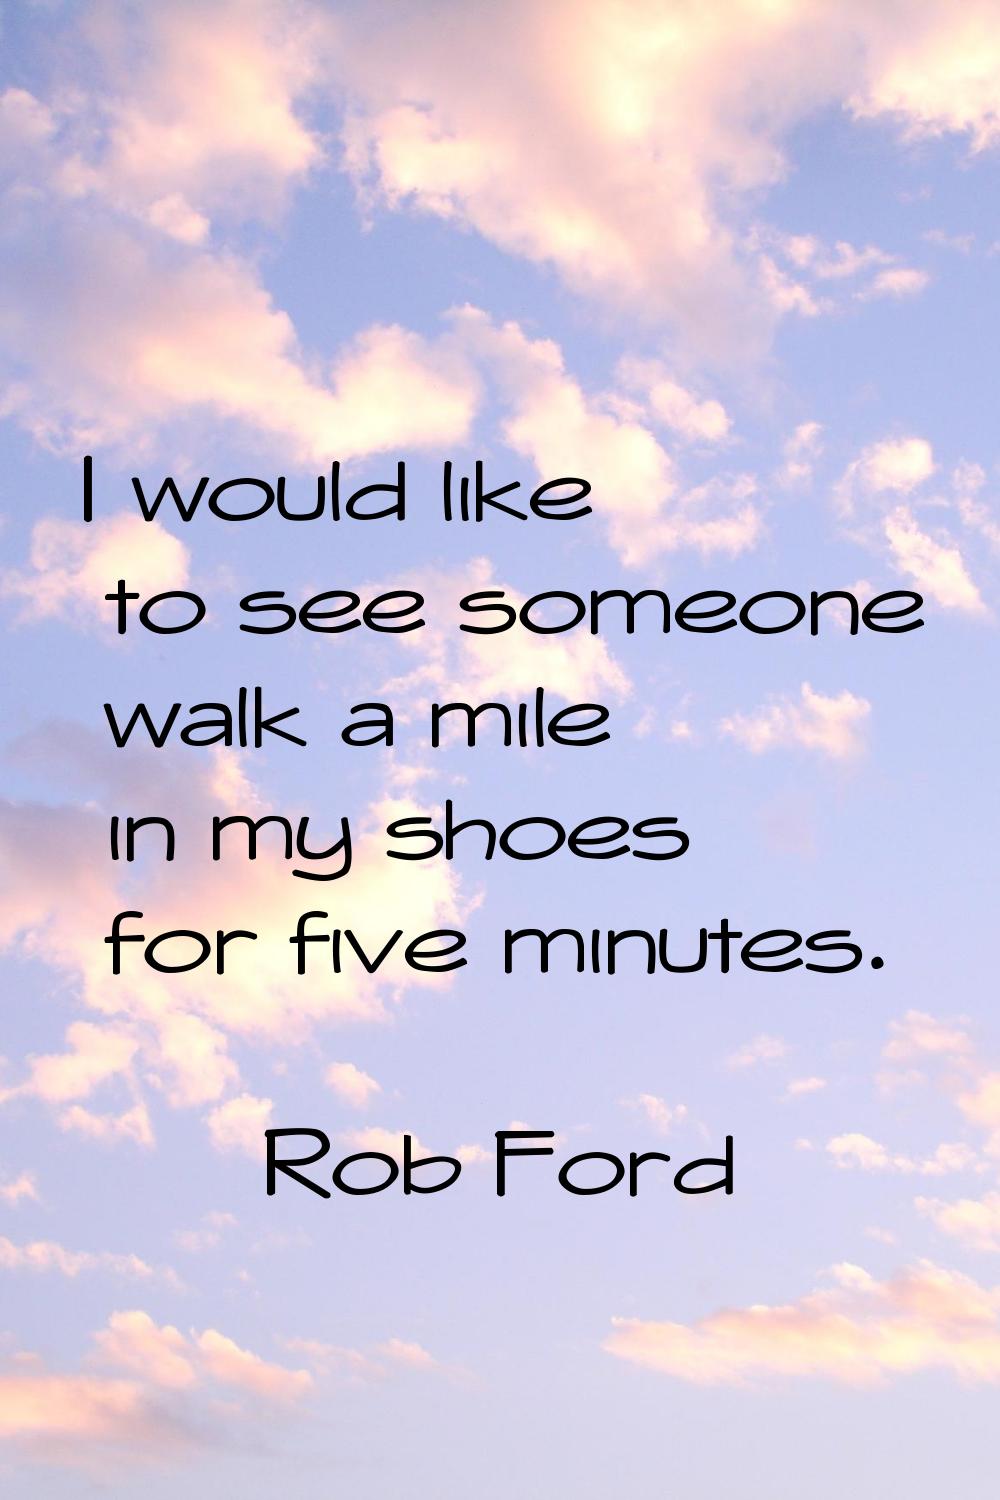 I would like to see someone walk a mile in my shoes for five minutes.